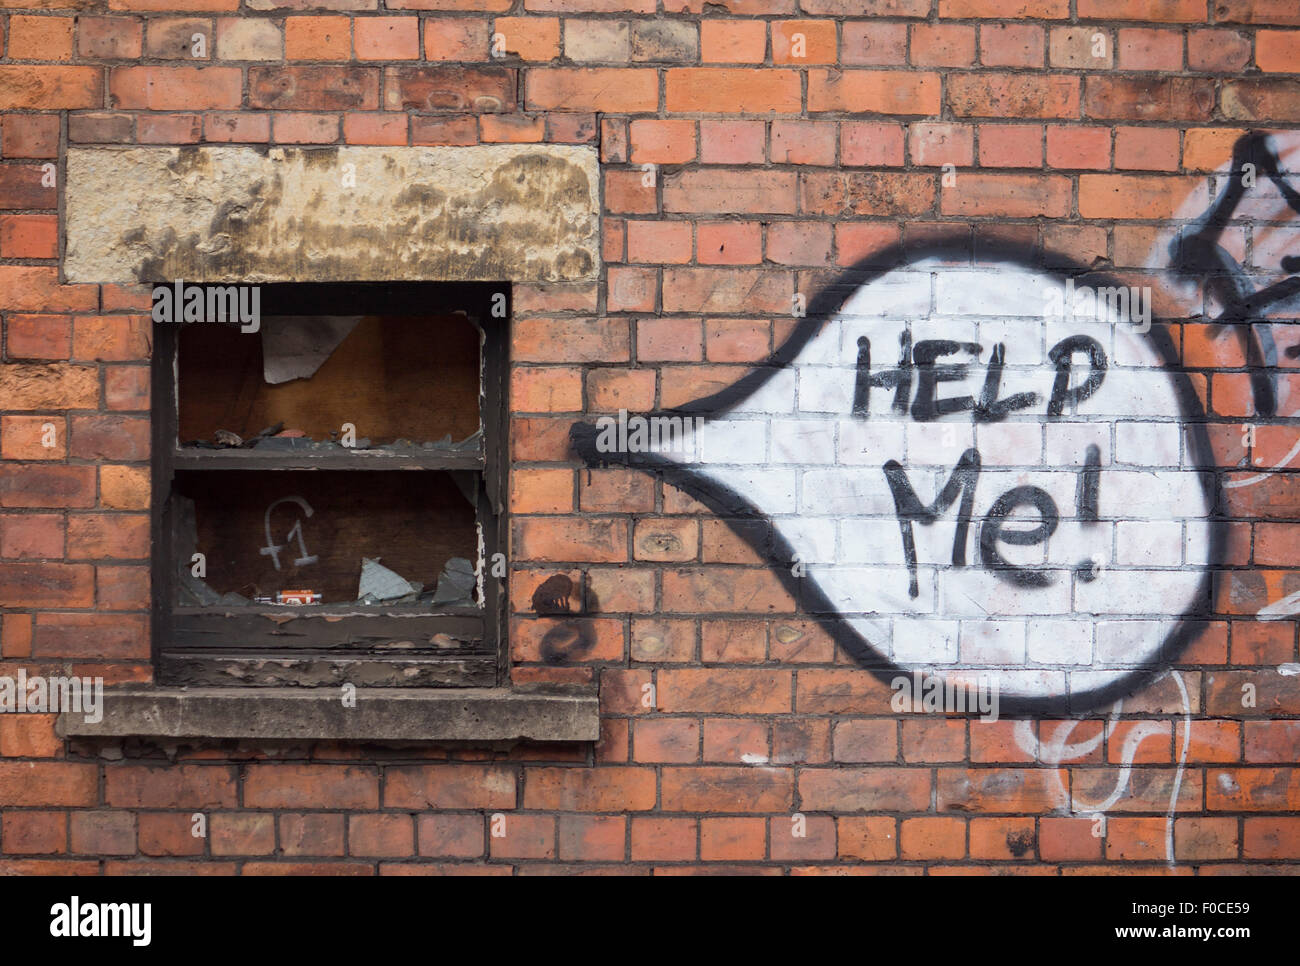 'Help Me!' graffiti words written in speech bubble painted next to coming from boarded up window derelict building red brick wal Stock Photo